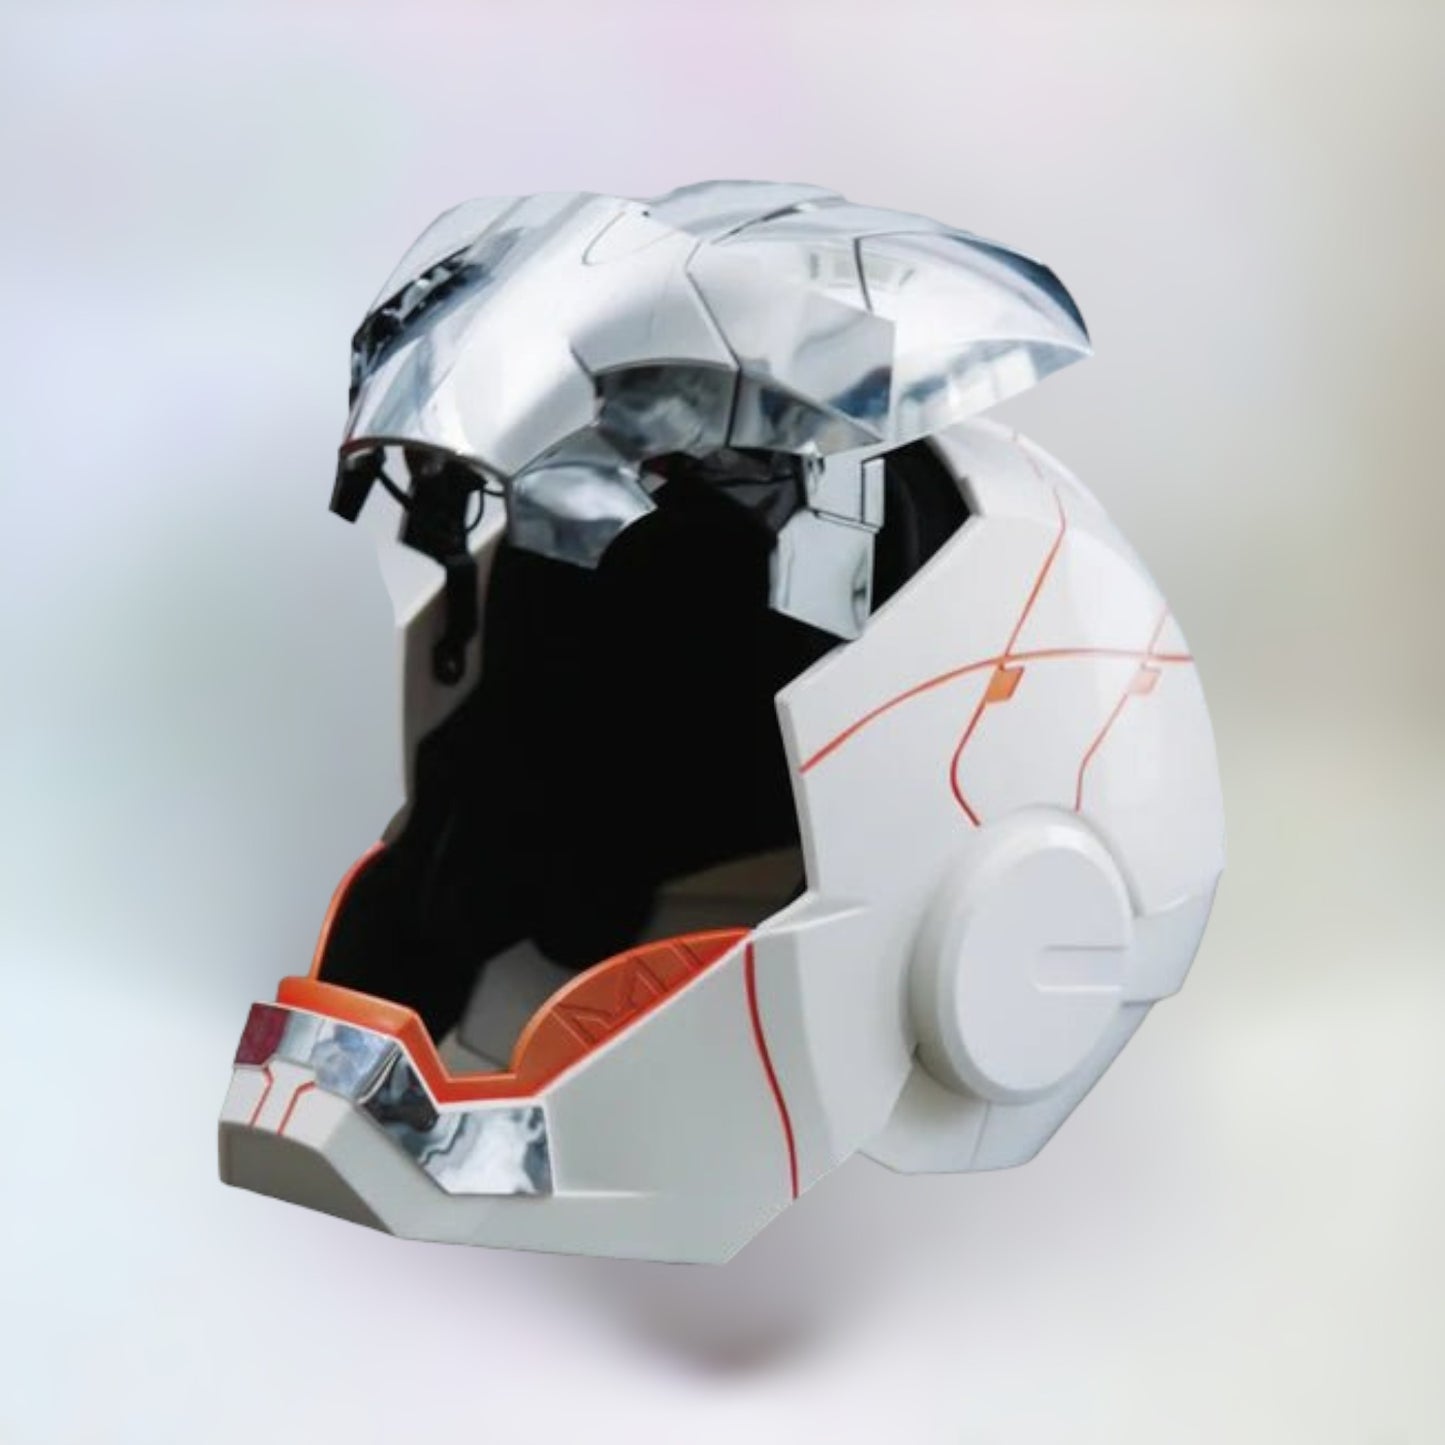 Iron Man Helmet MK5 White Edition with Jarvis Voice Control with Open Style 1 on a plain white background.